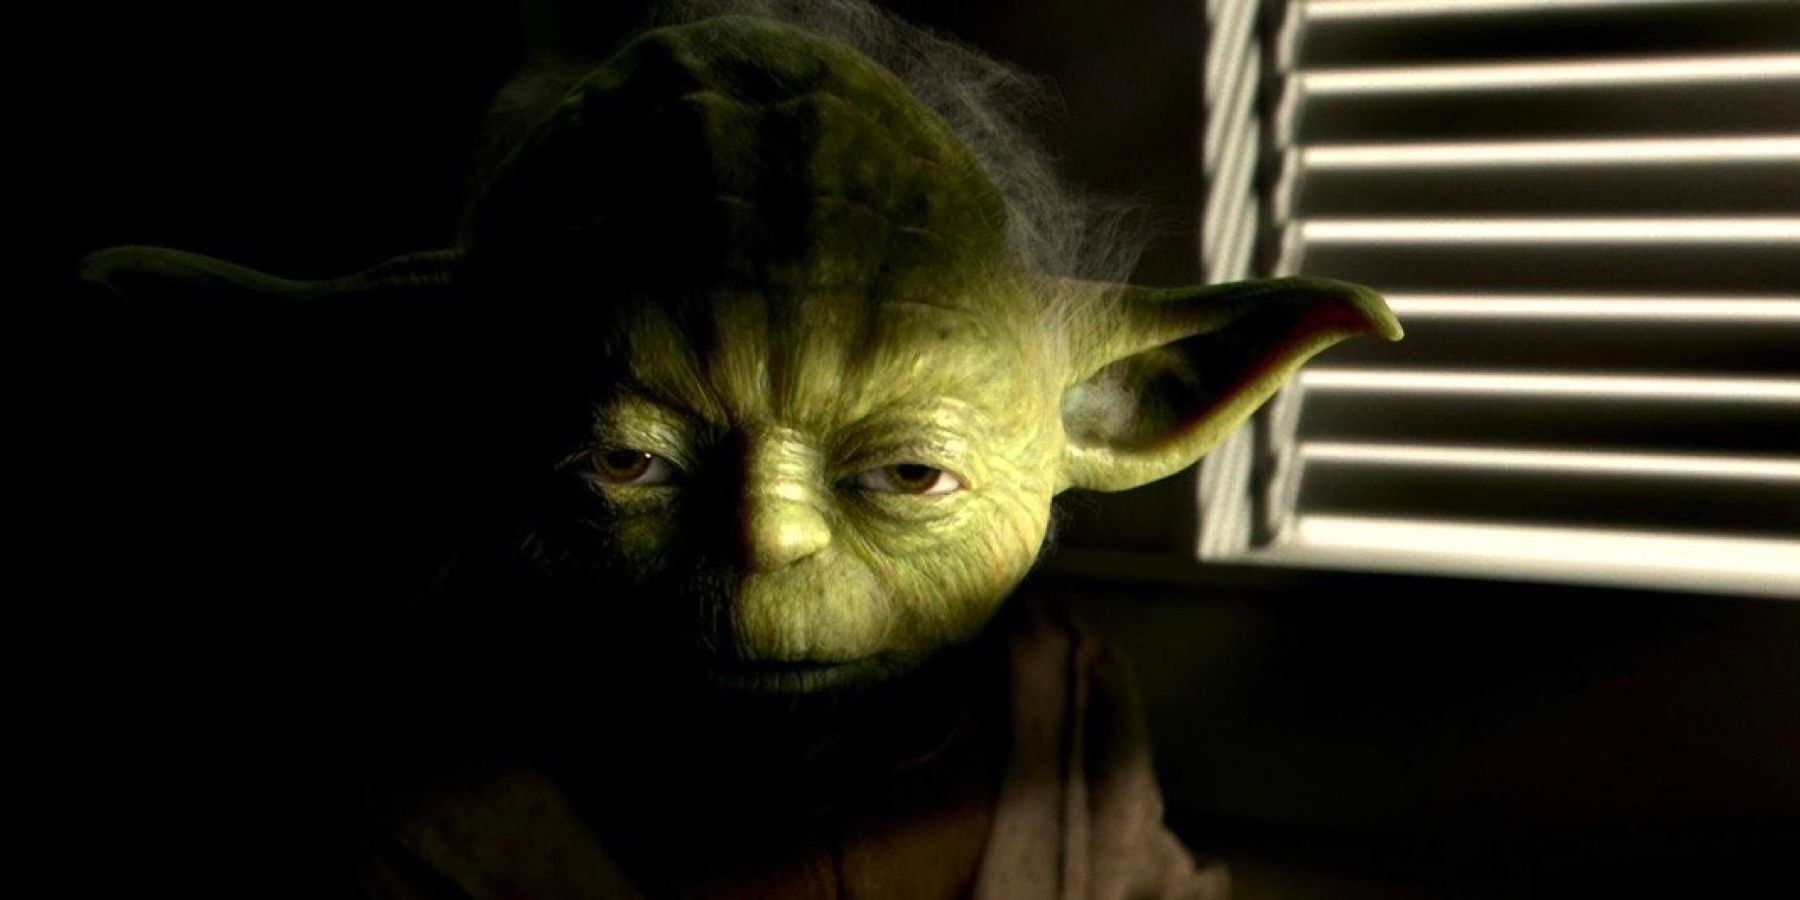 Jedi Master Yoda sits half in shadow inside his meditation chamber in Star Wars: Episode III - Revenge of the Sith.